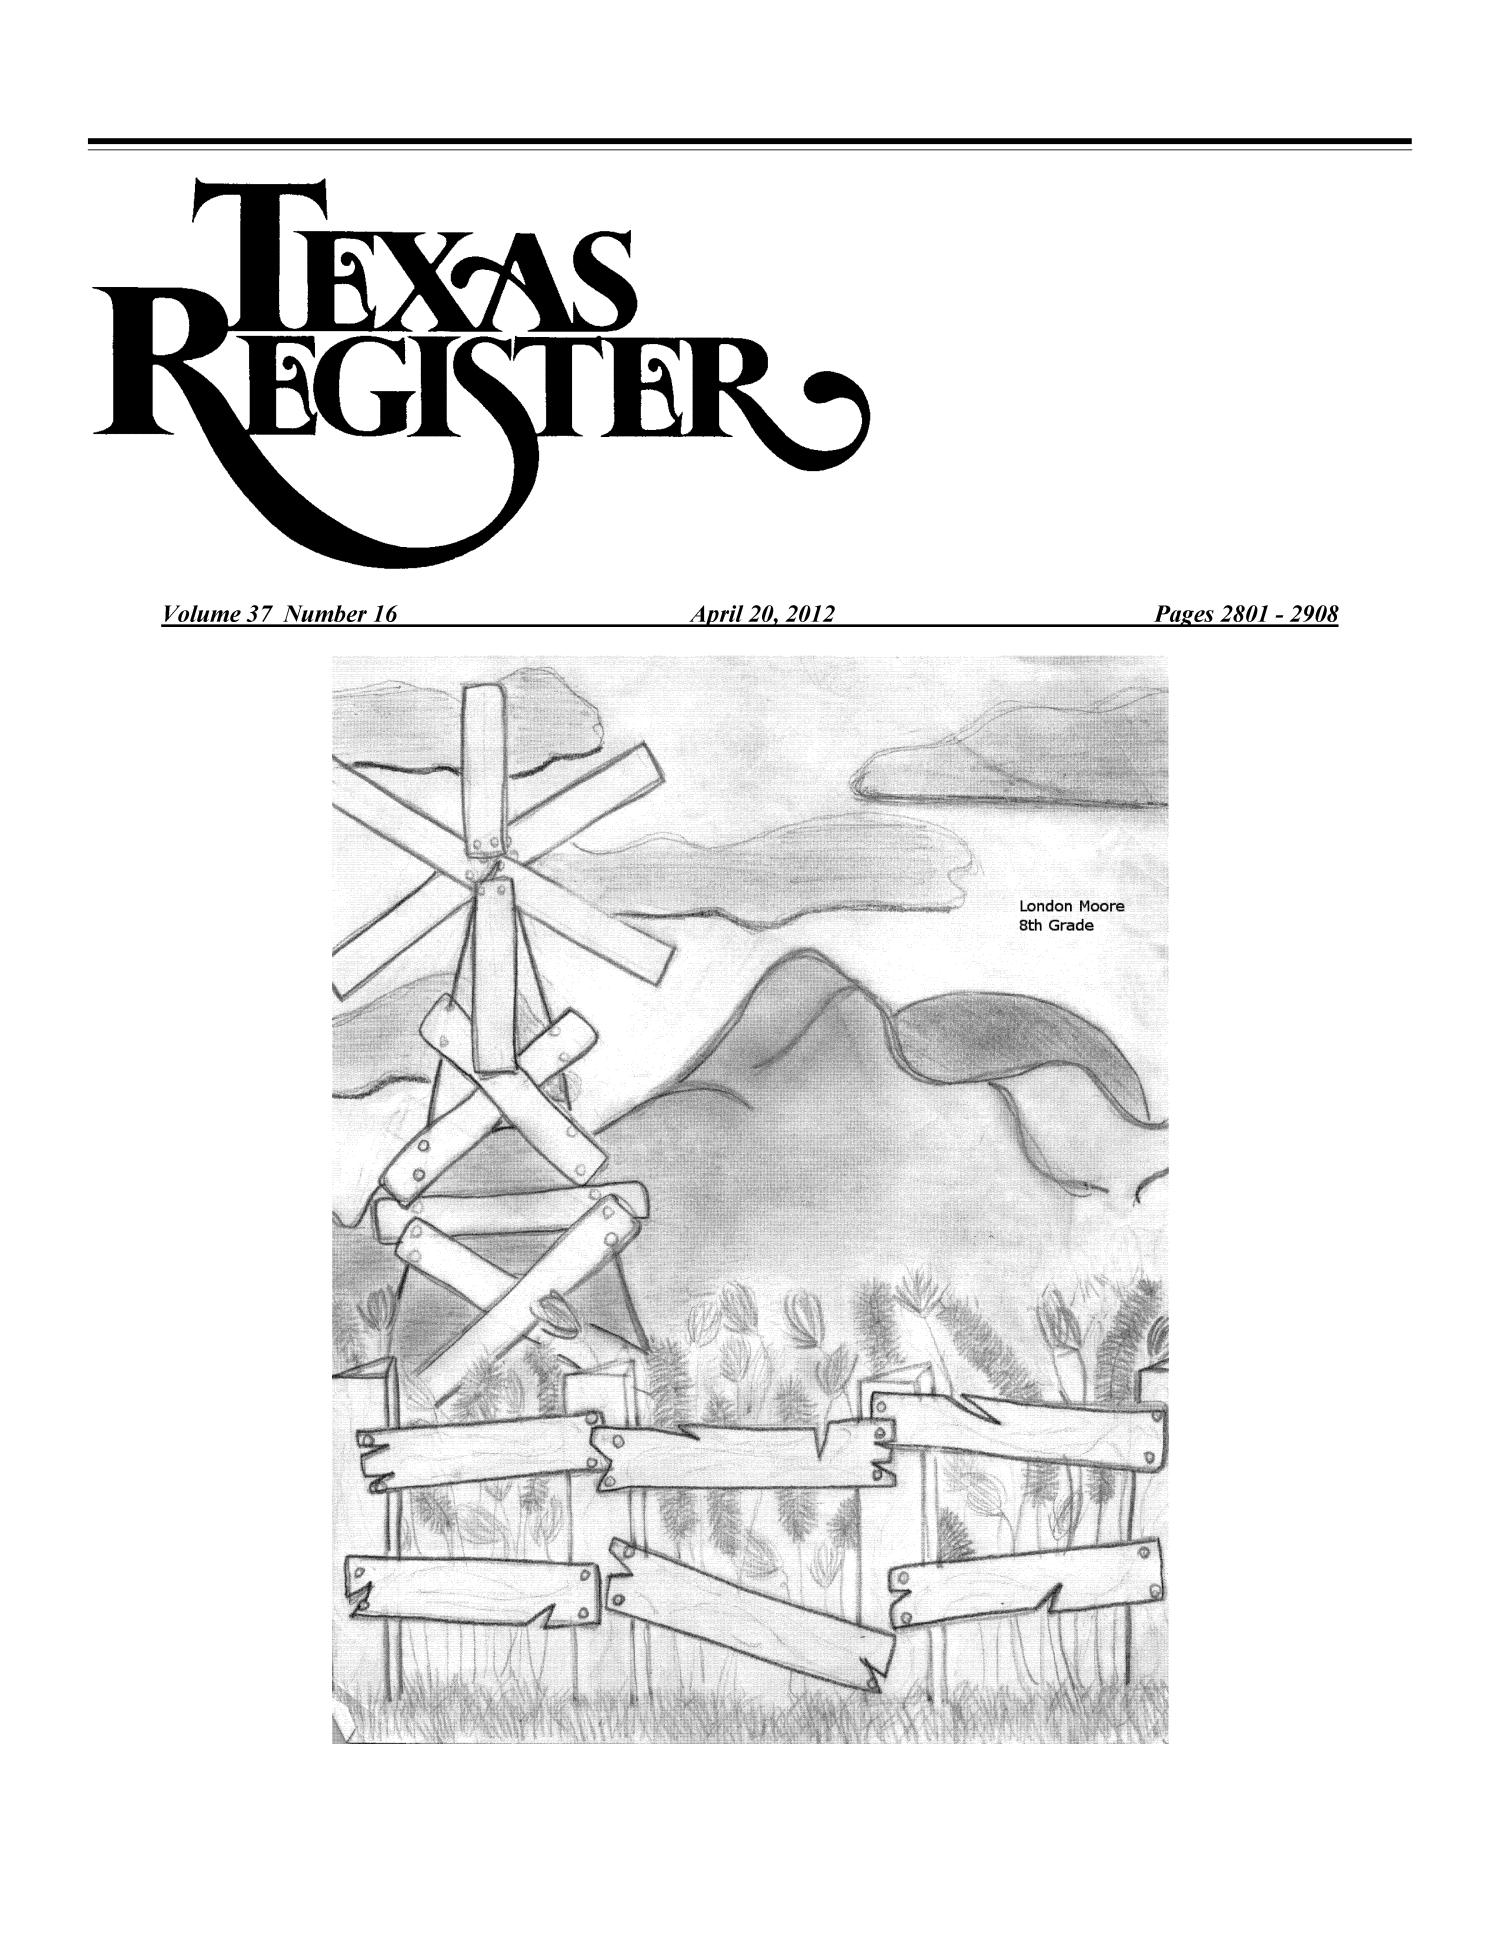 Texas Register, Volume 37, Number 16, Pages 2801-2908, April 20, 2012
                                                
                                                    Title Page
                                                